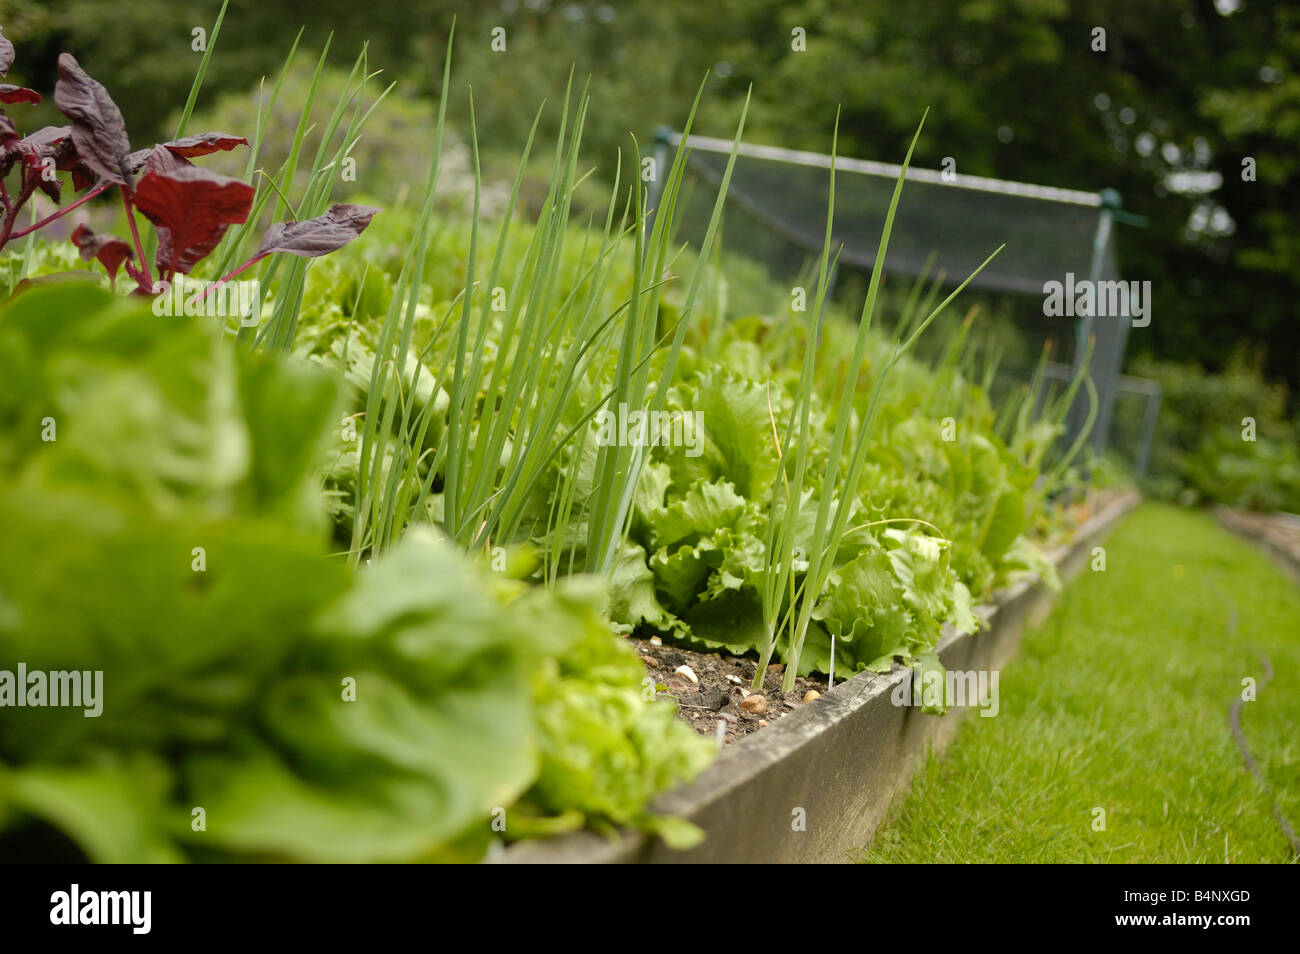 Salad crops growing in raised beds Stock Photo